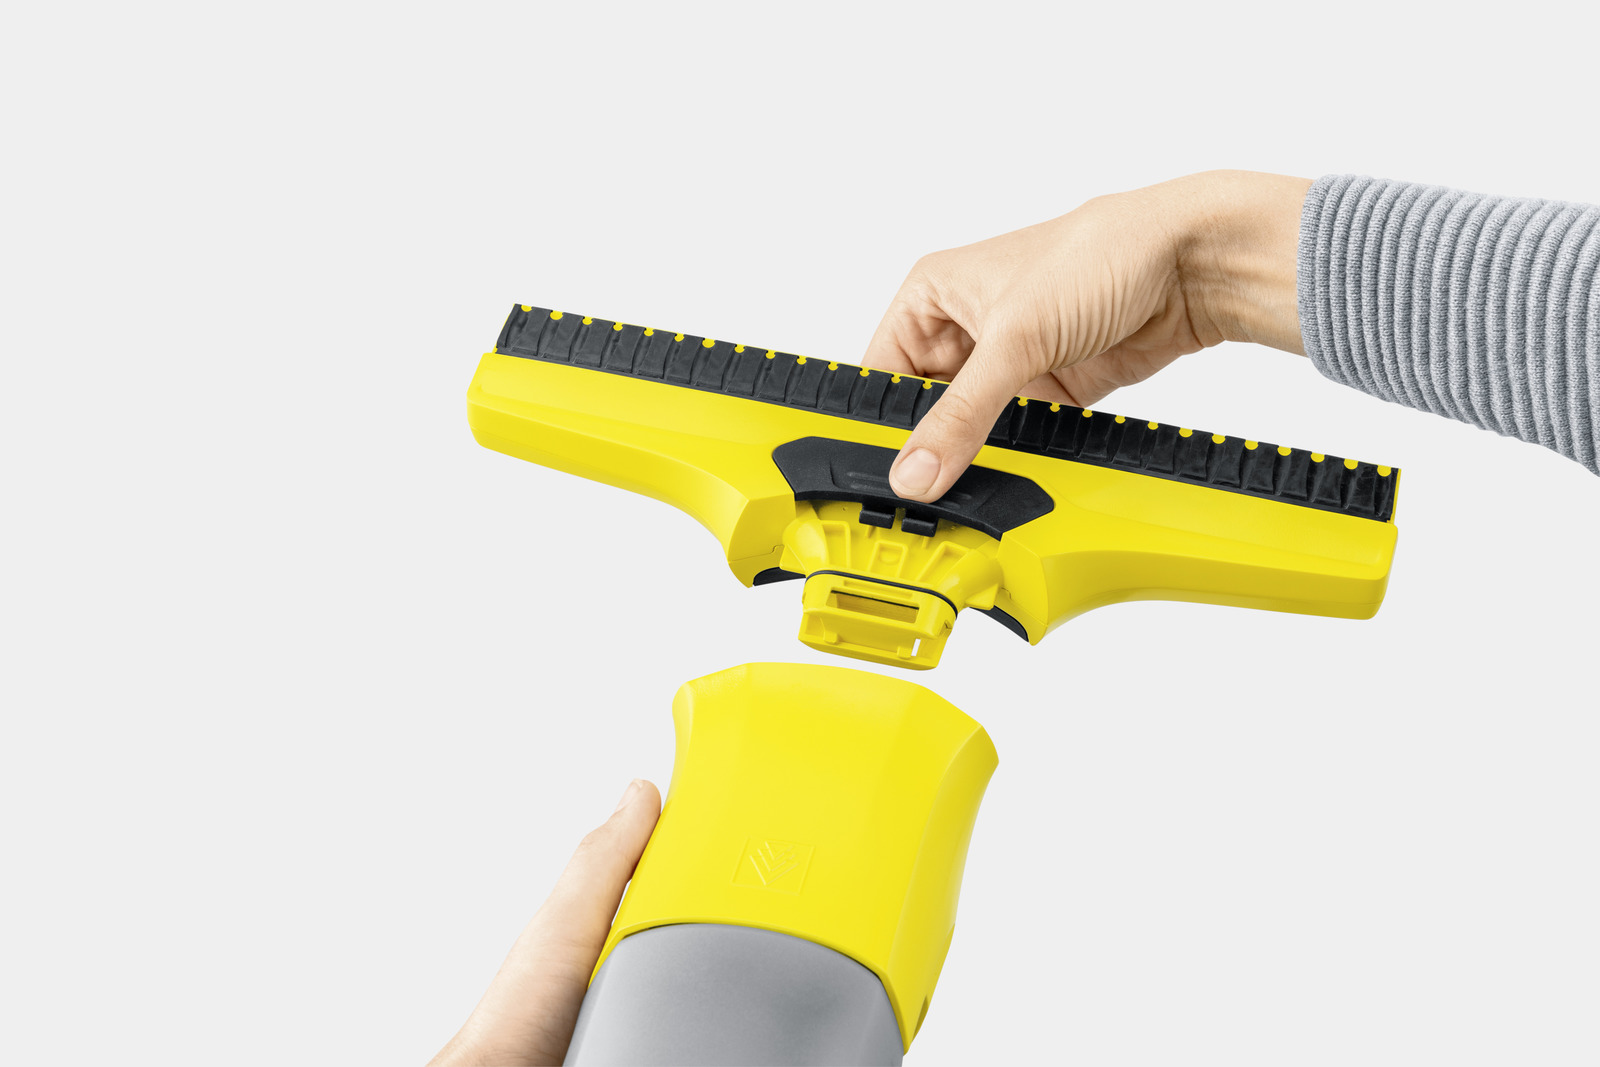 KARCHER WINDOW VAC REVIEW, WHAT WE THINK AFTER 6 MONTHS OF USE